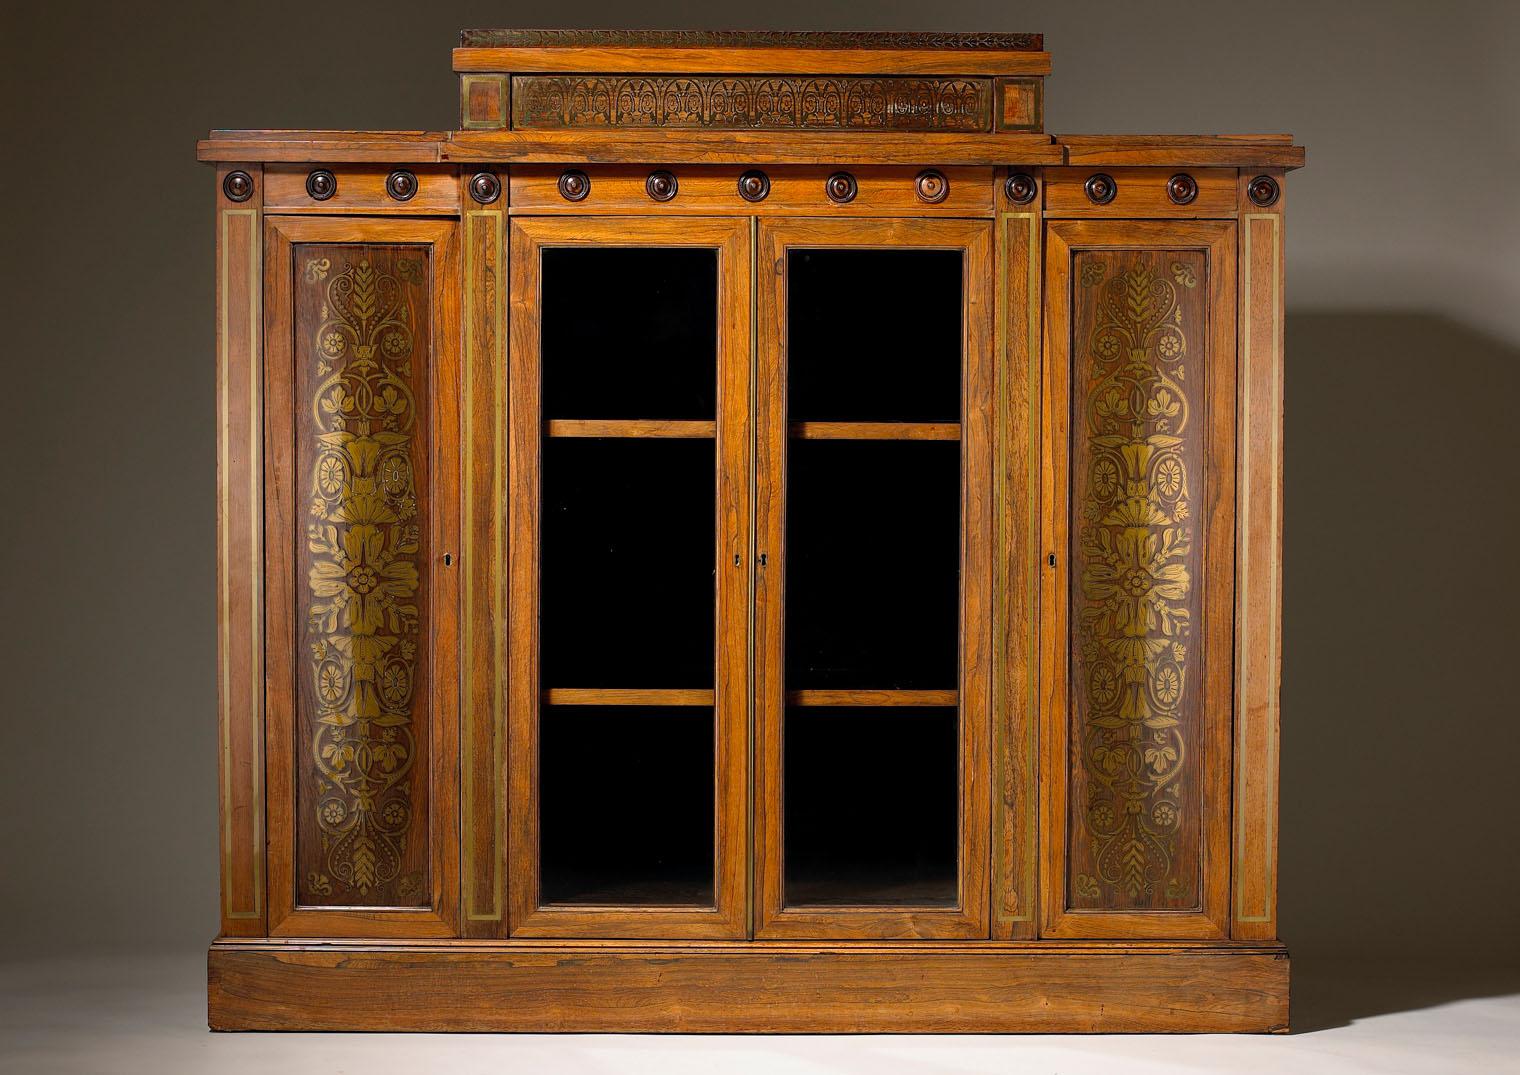 A fine early 19th-century Grecian revival side cabinet in the manner of George Bullock, two glazed central doors flanked by cupboards with inlaid marquetry panels of foliate floral detail the frieze above picked out with turned wooden roundels and a